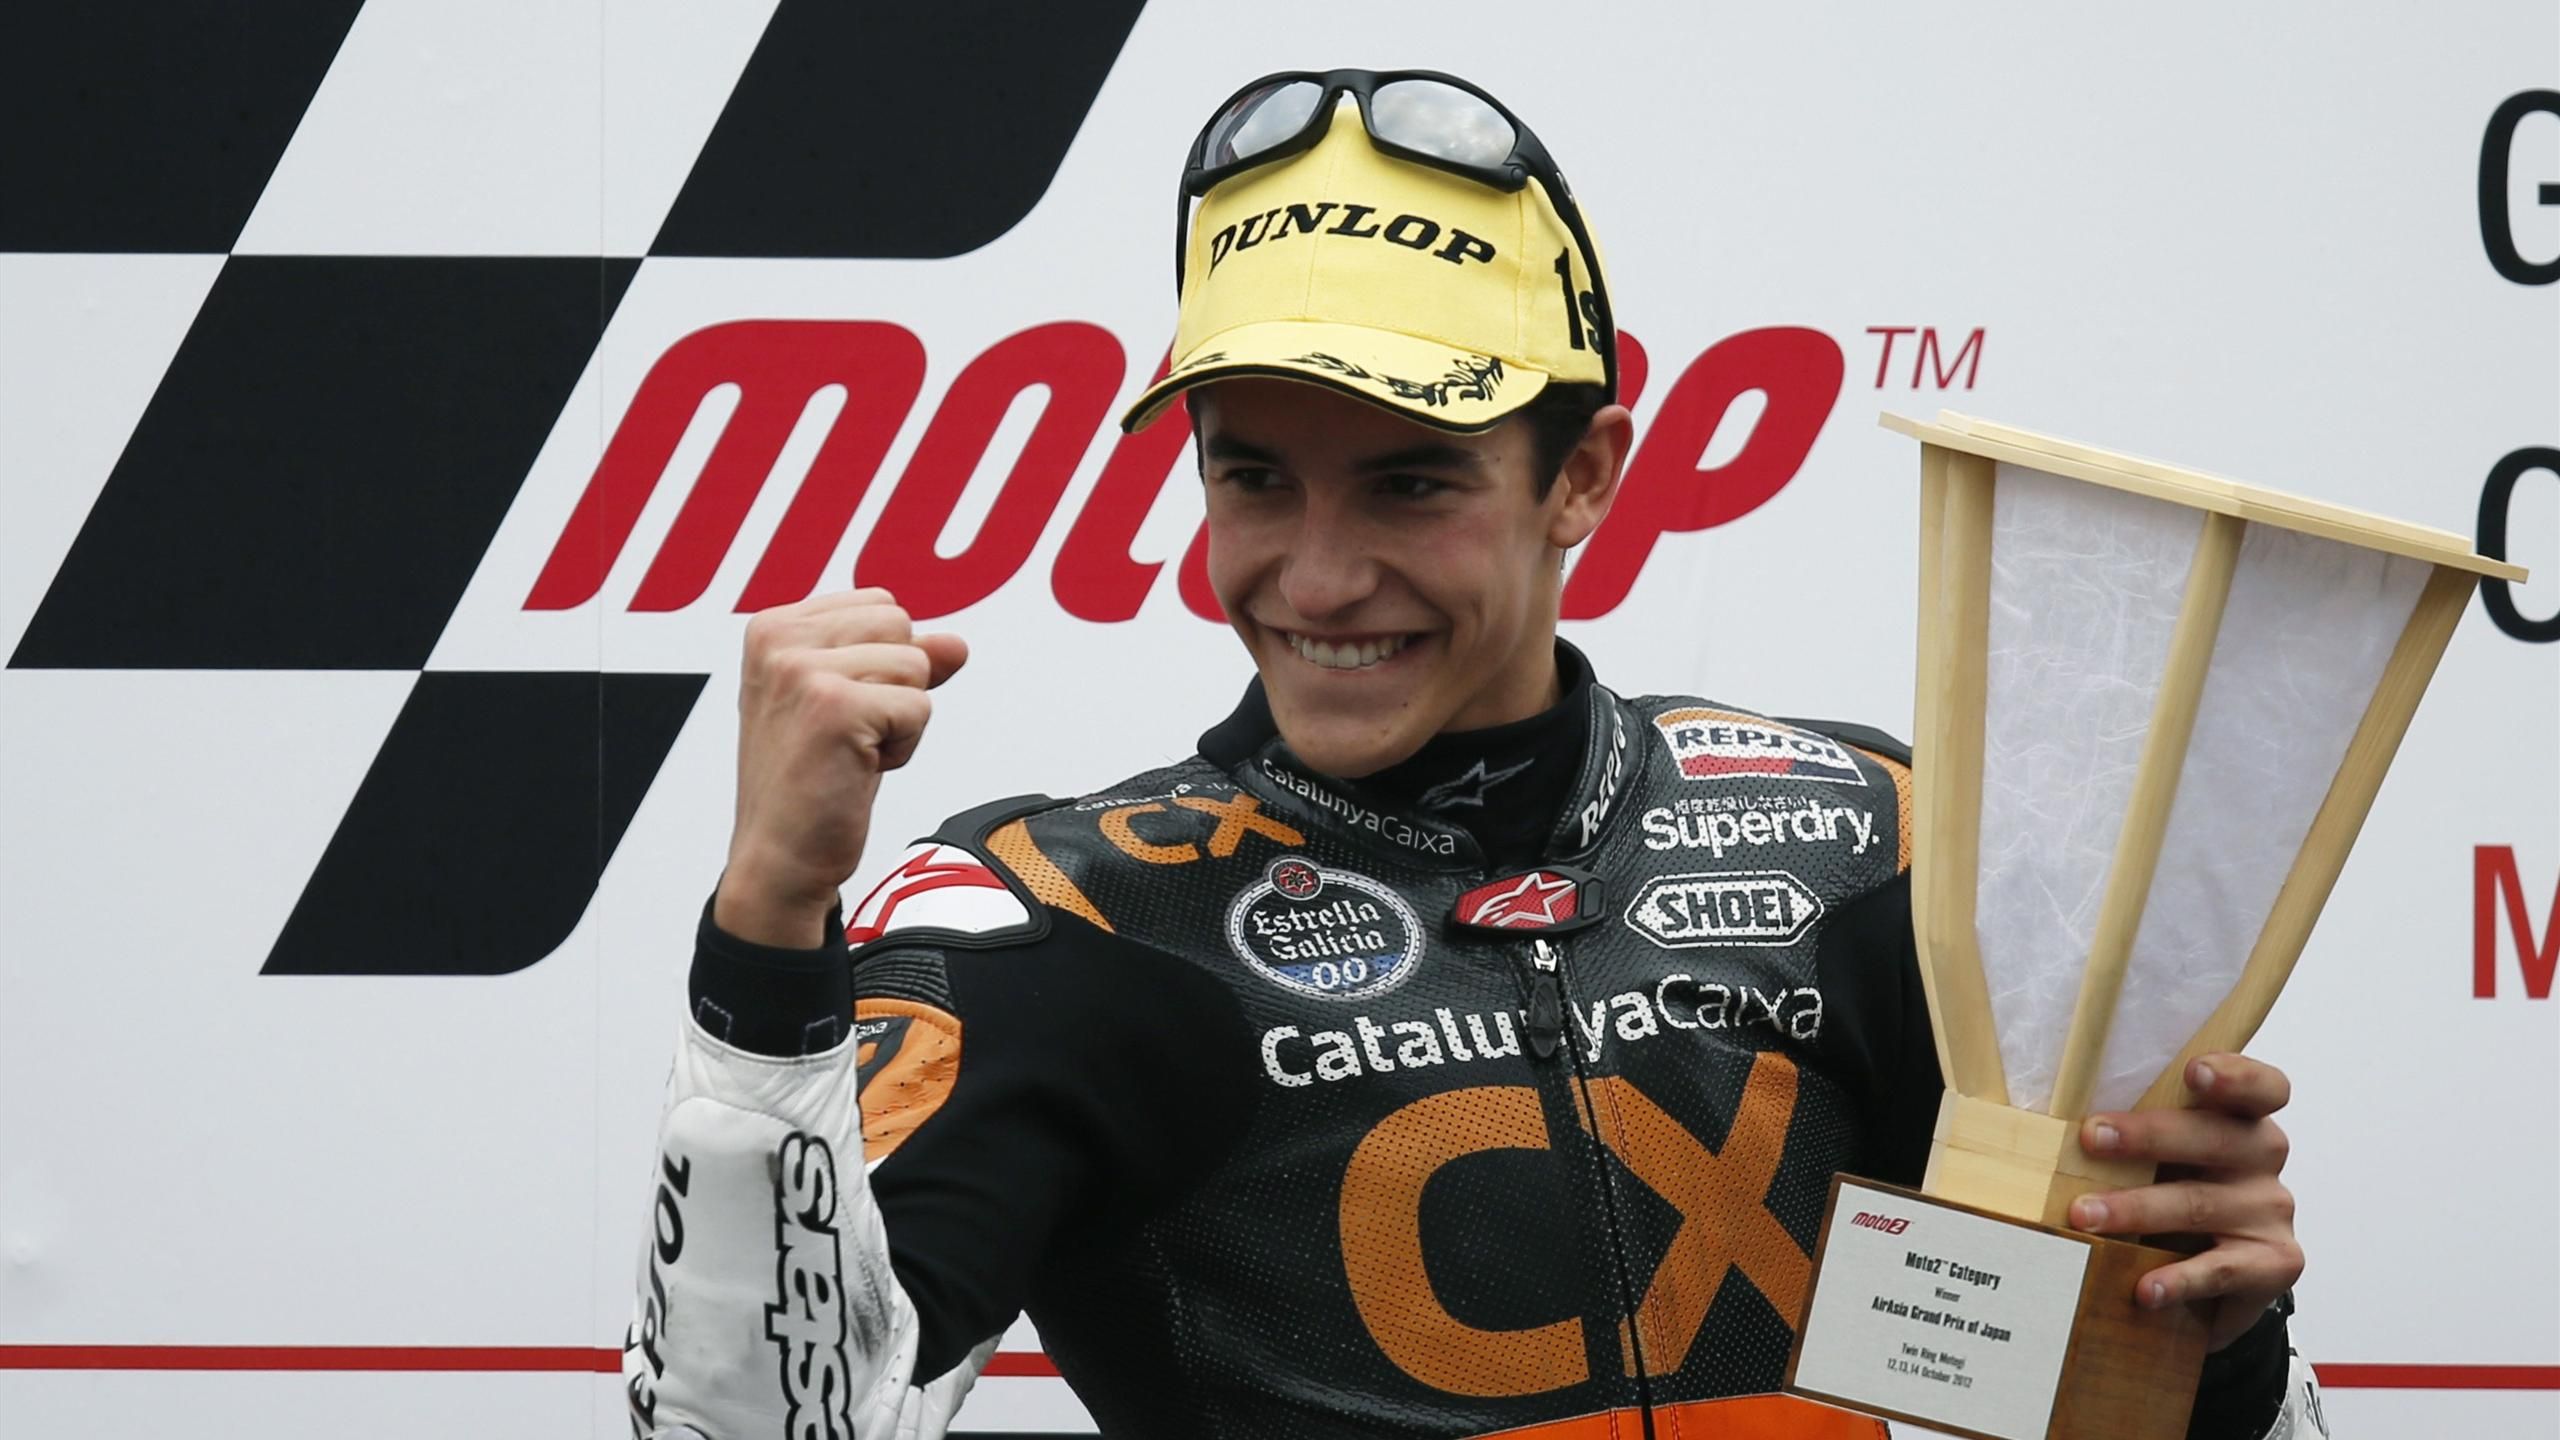 Marquez returns with superb podium on Sprint and authors classic comeback  on Sunday - WE ARE 93